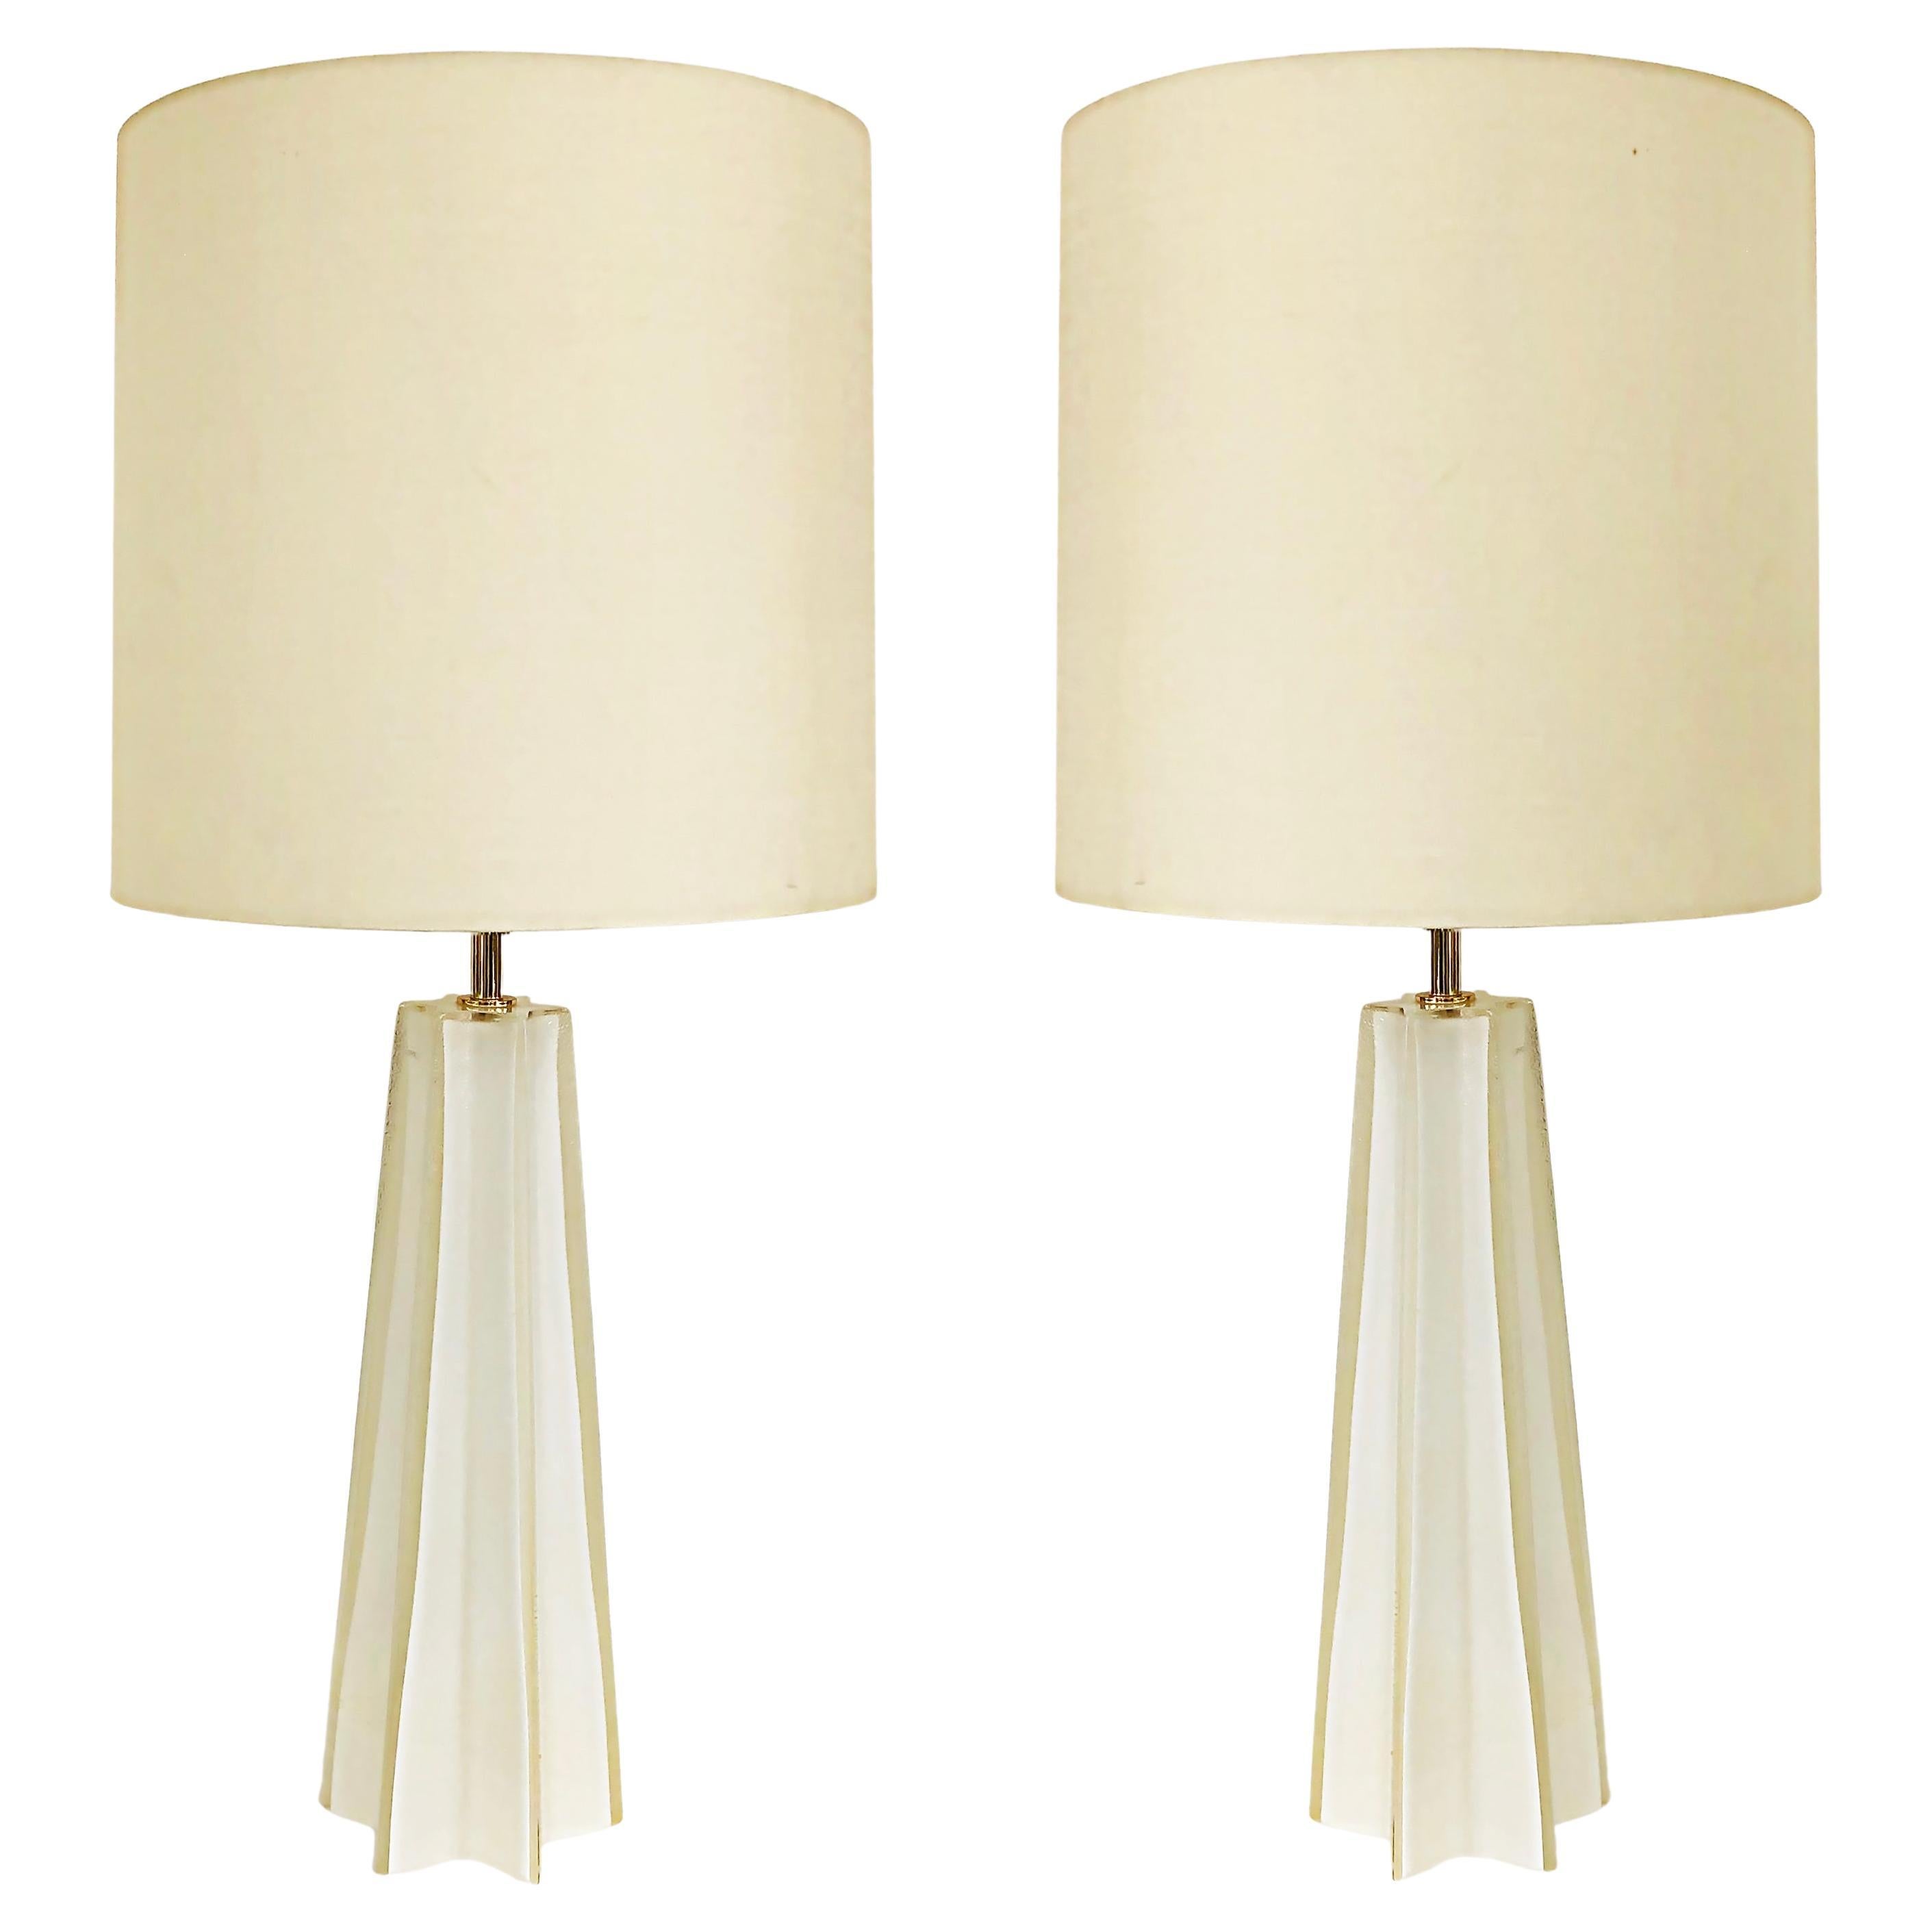 New Murano "Star" Form Cased Glass Table Lamps with Single Socket For Sale